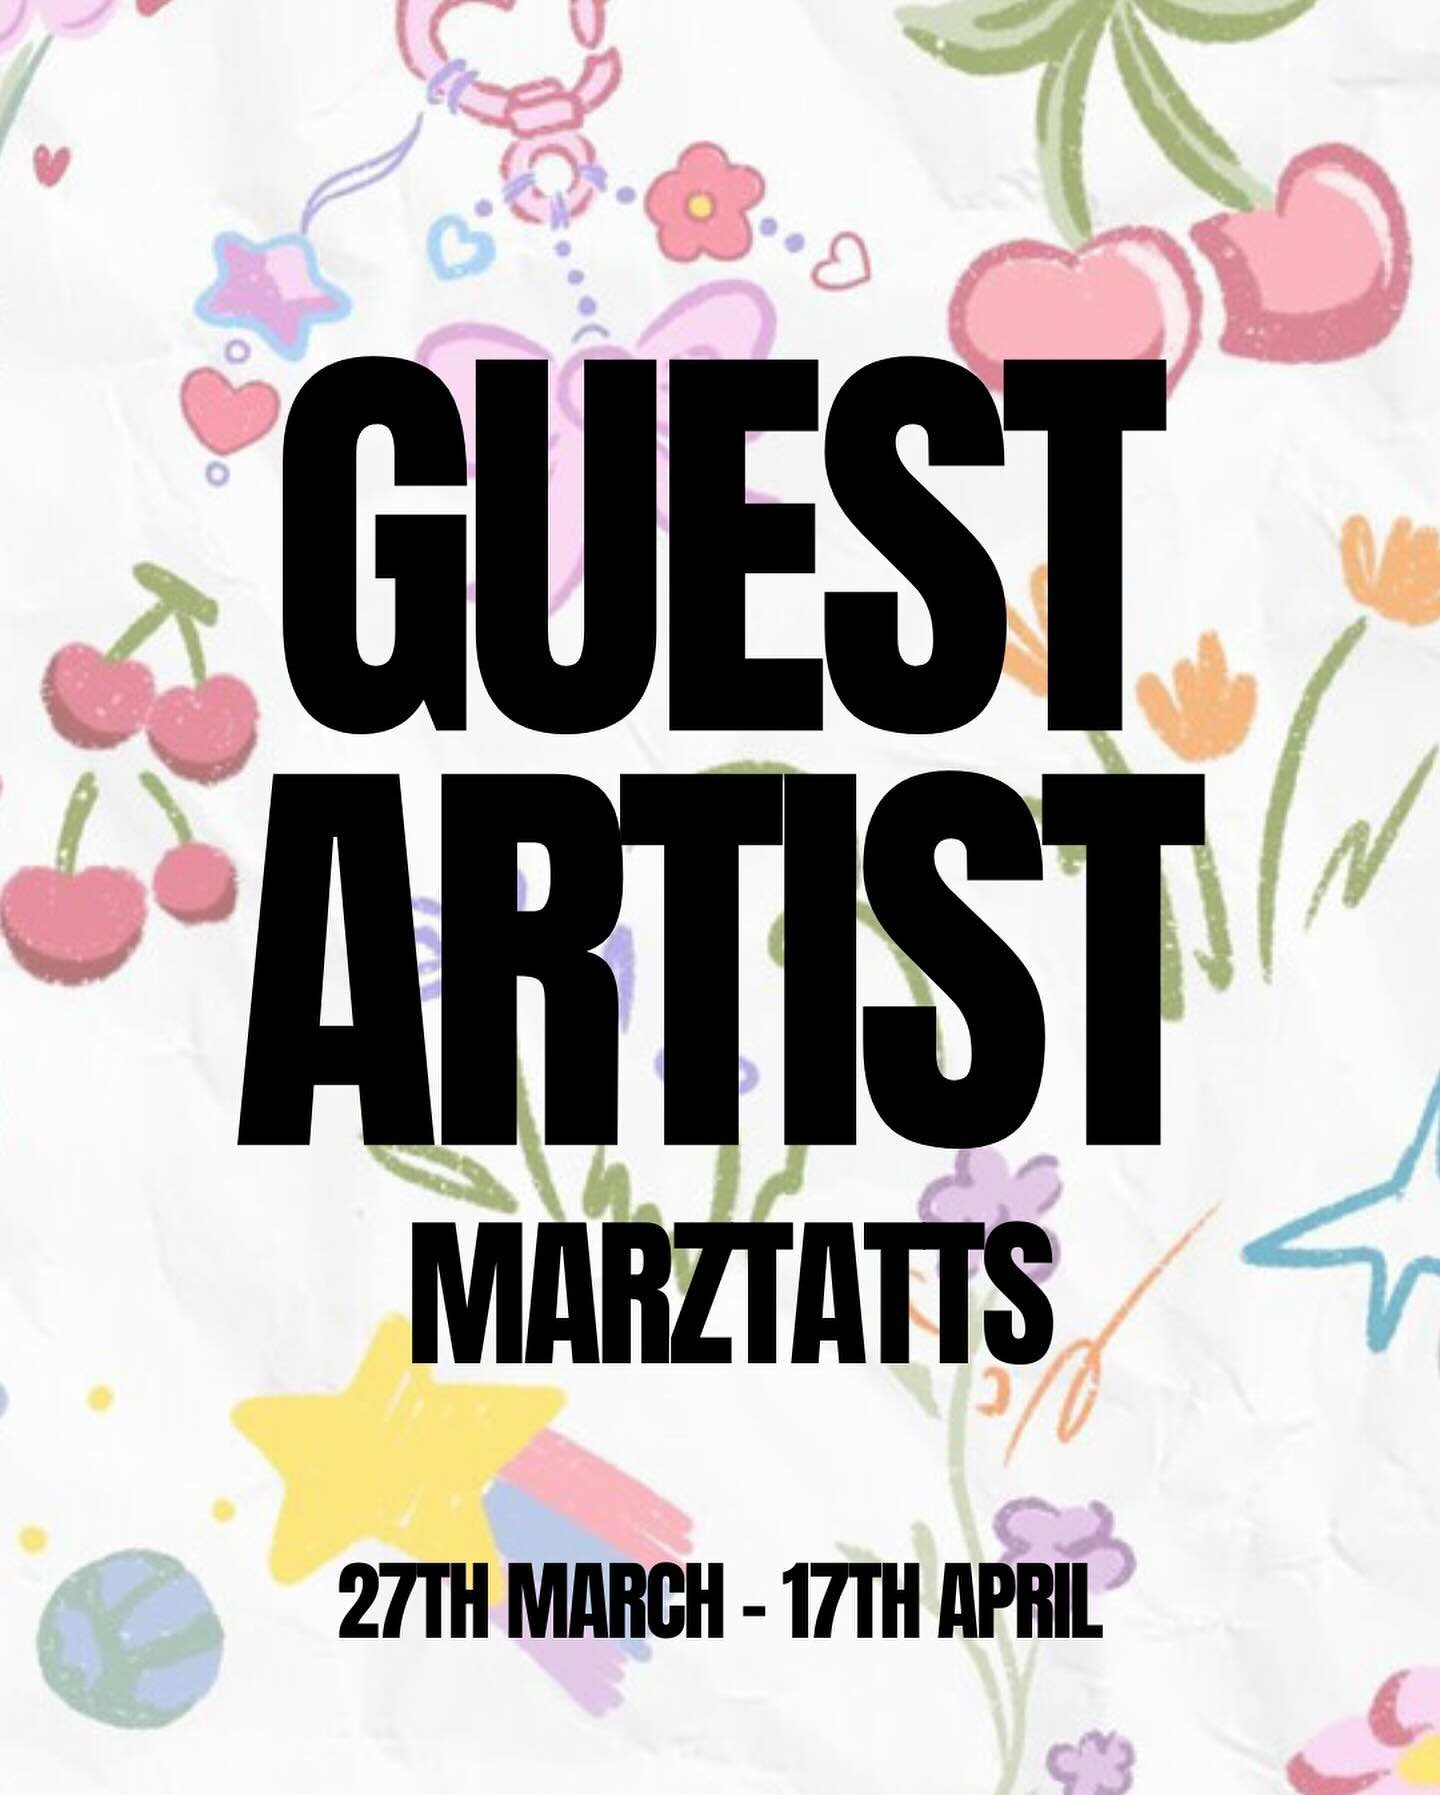 we&rsquo;re super excited to have @marztatts with us from the 27th of march til the 17th of april✨

please message her directly for bookings! 🐻